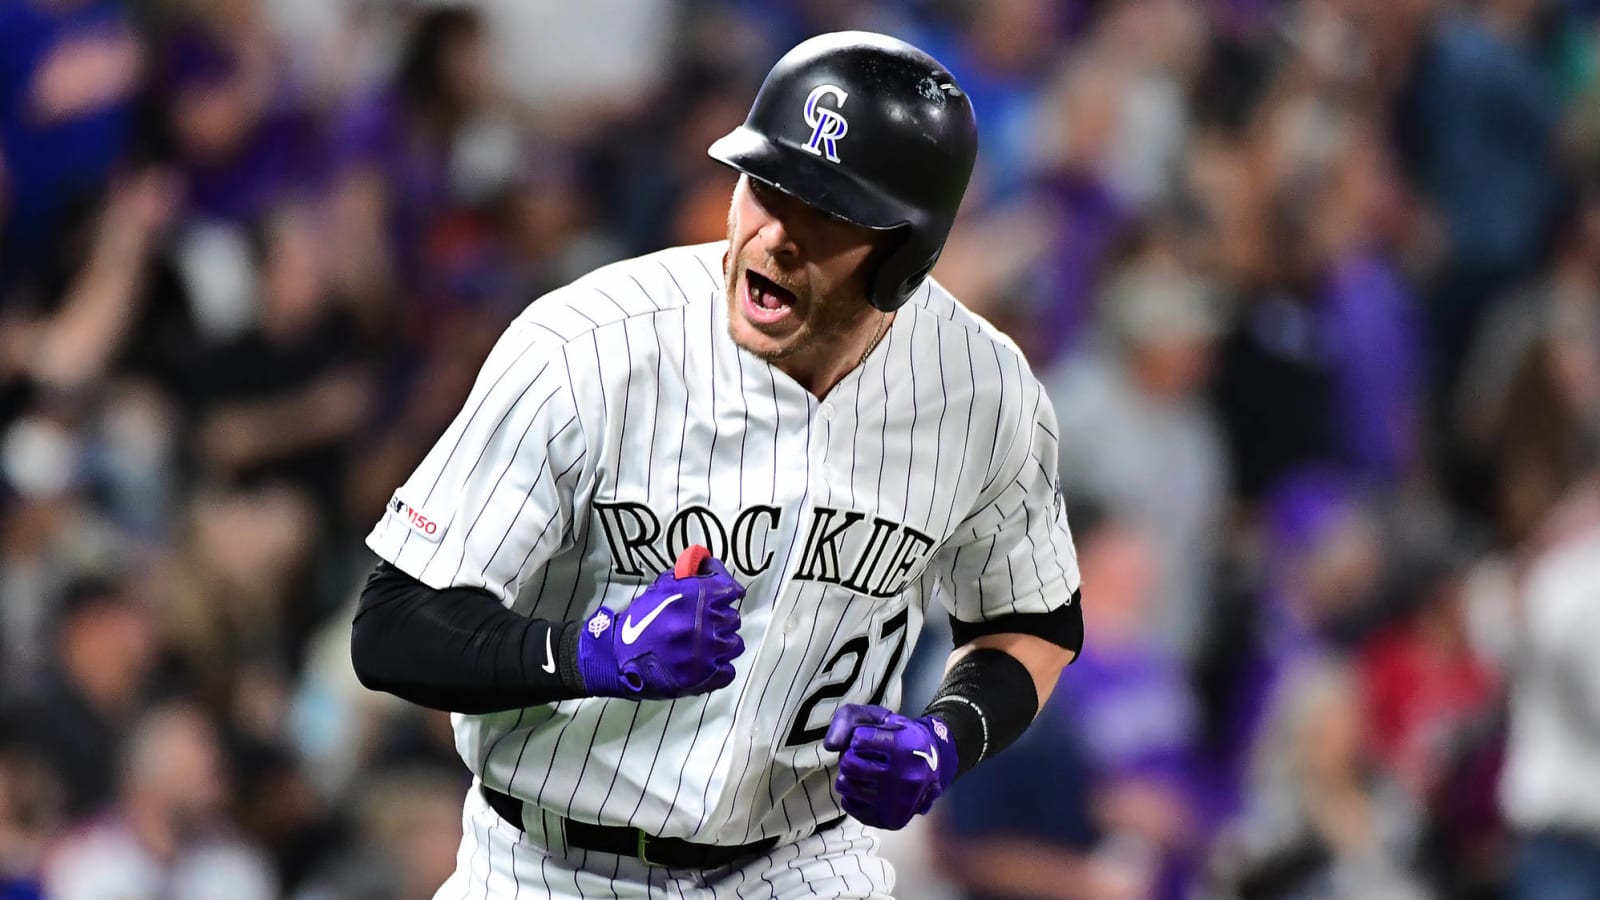 The 'Rockies to hit 30+ HRs' quiz